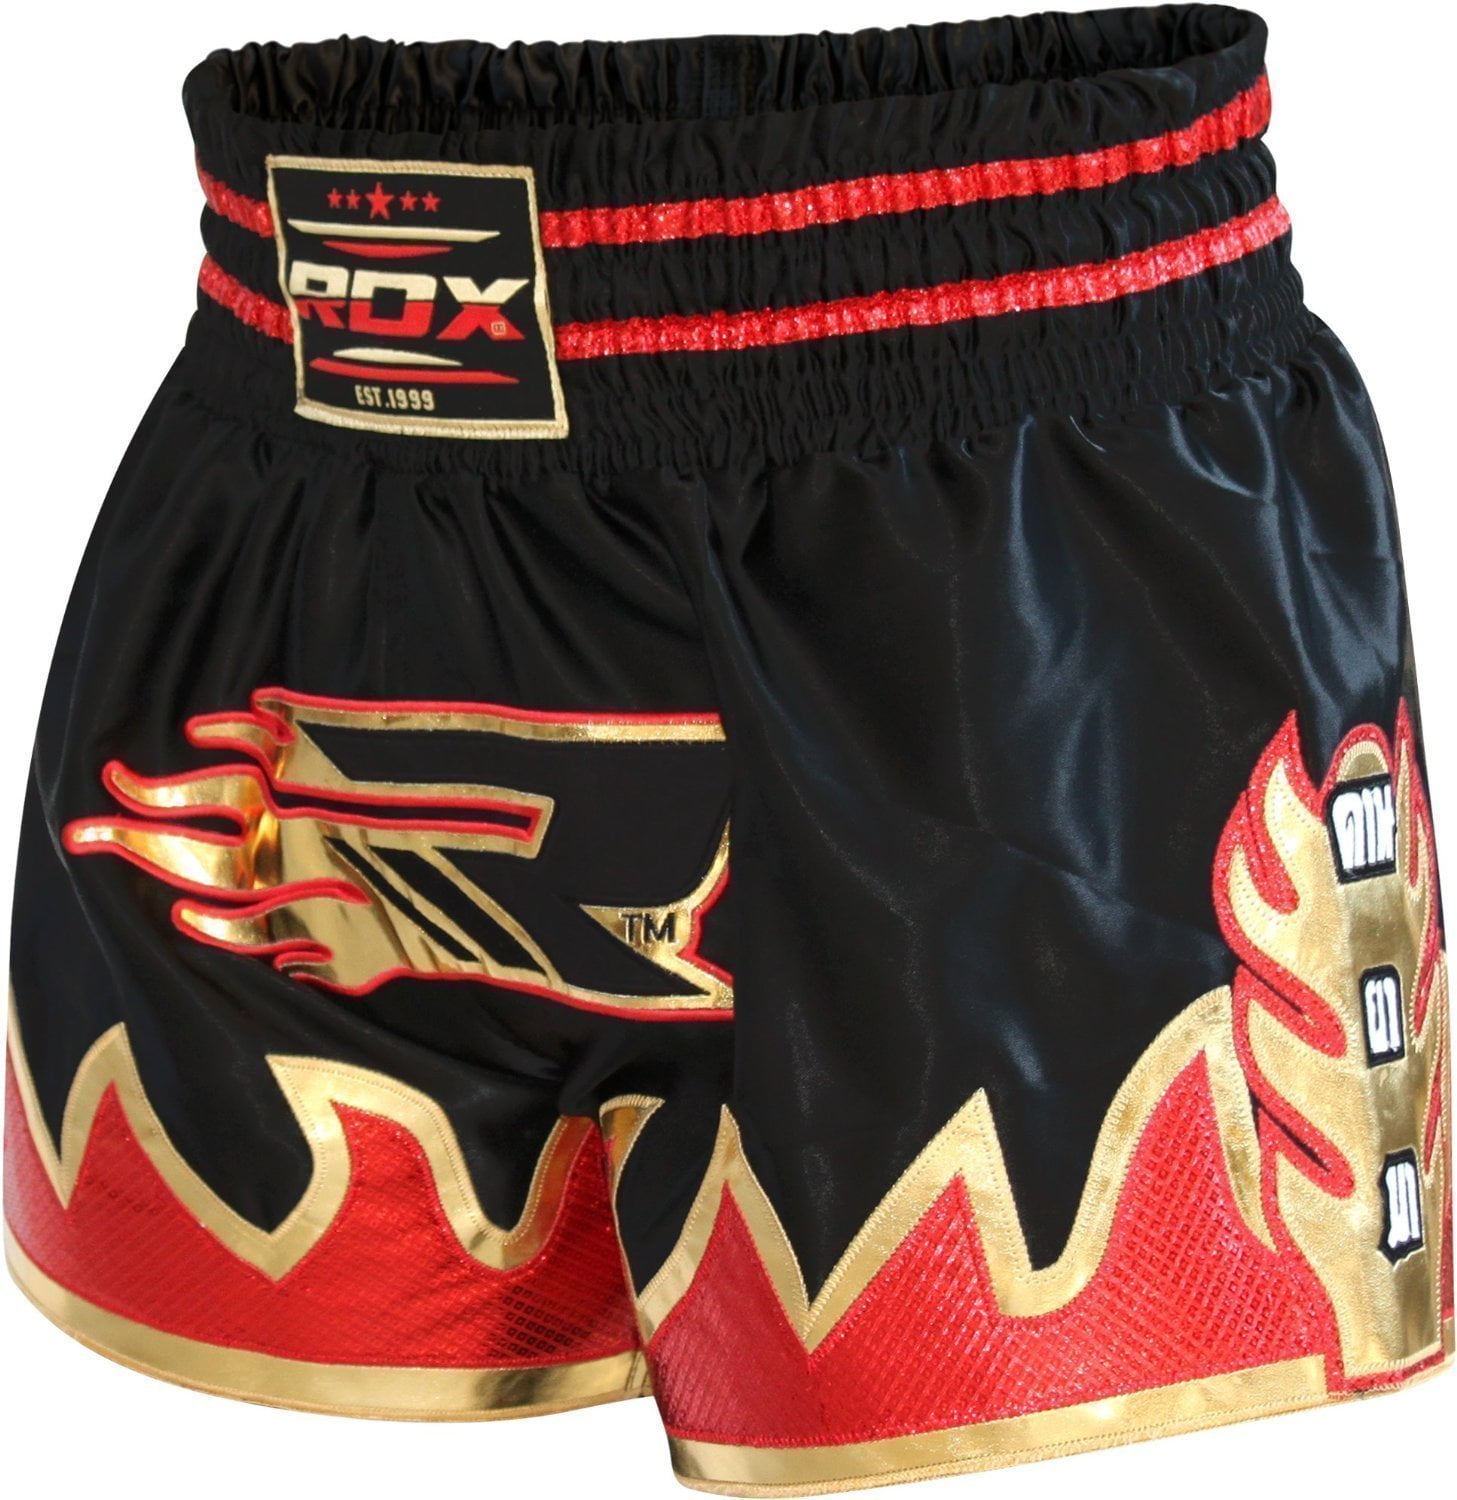 RDX Fight Shorts Cage MMA Grappling Short Boxing Muay Thai Mens Pants Wear W 